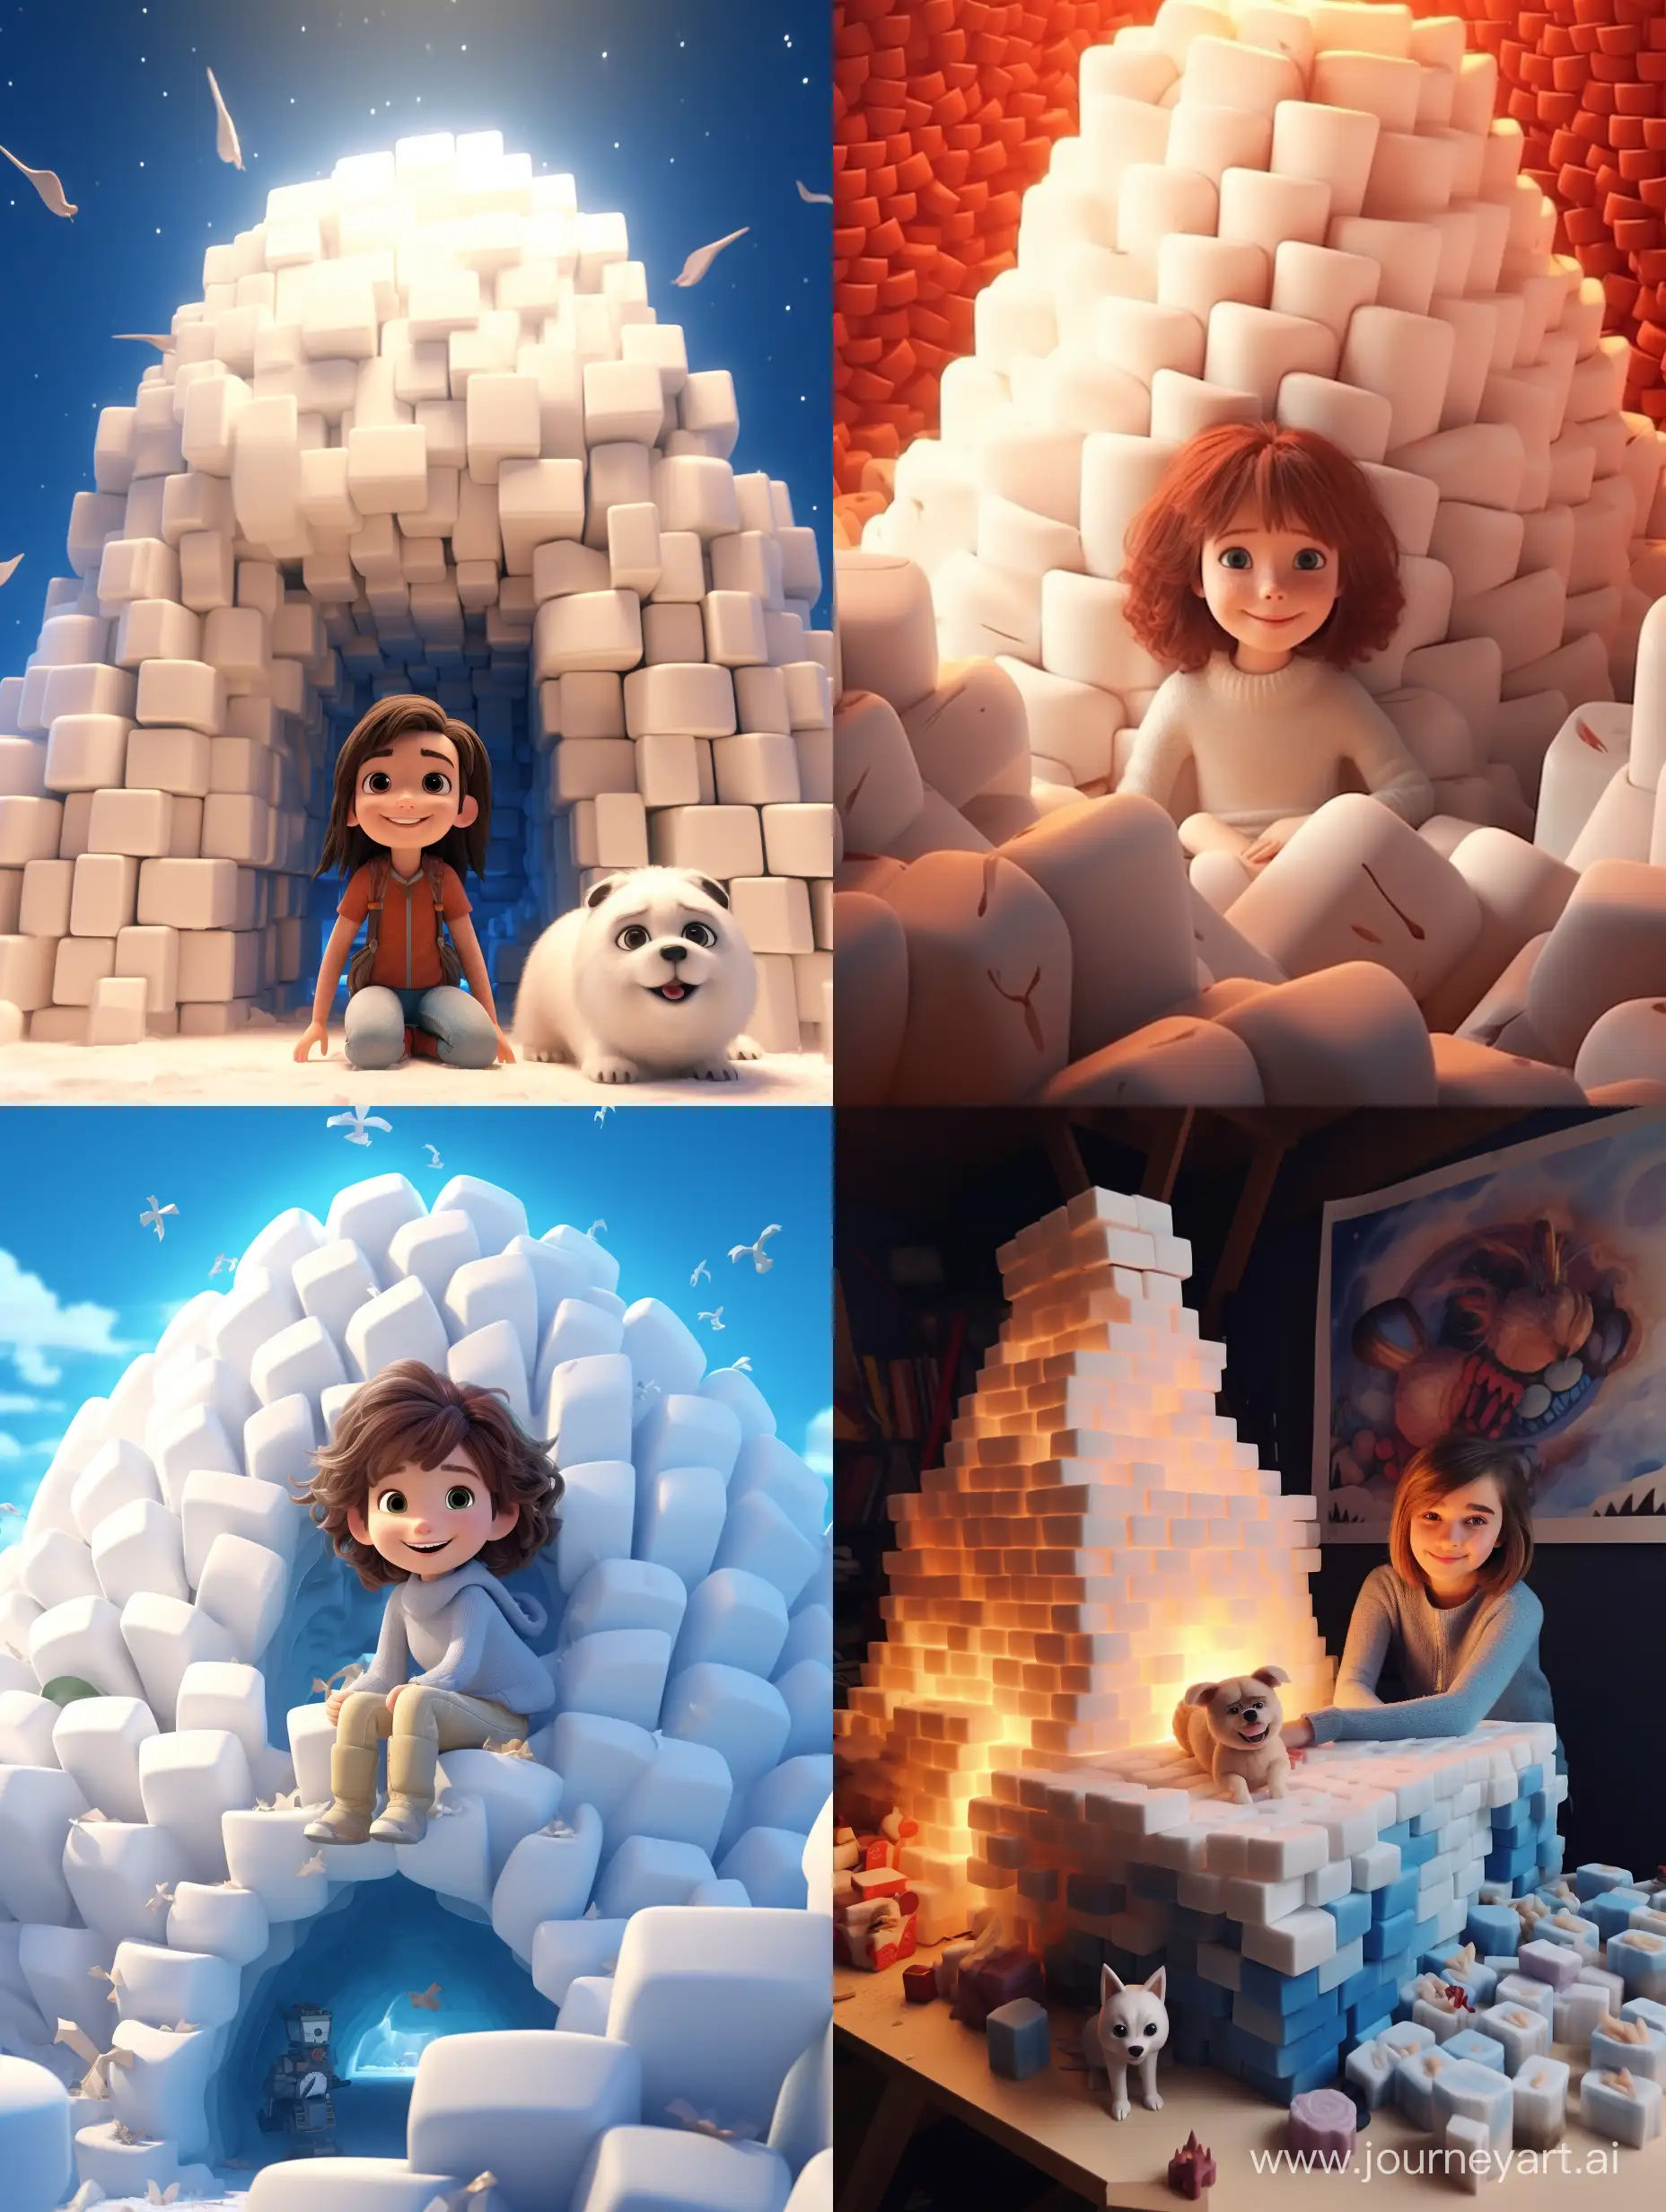 Girl-Building-Snow-Igloo-in-Pixar-Style-3D-Animation